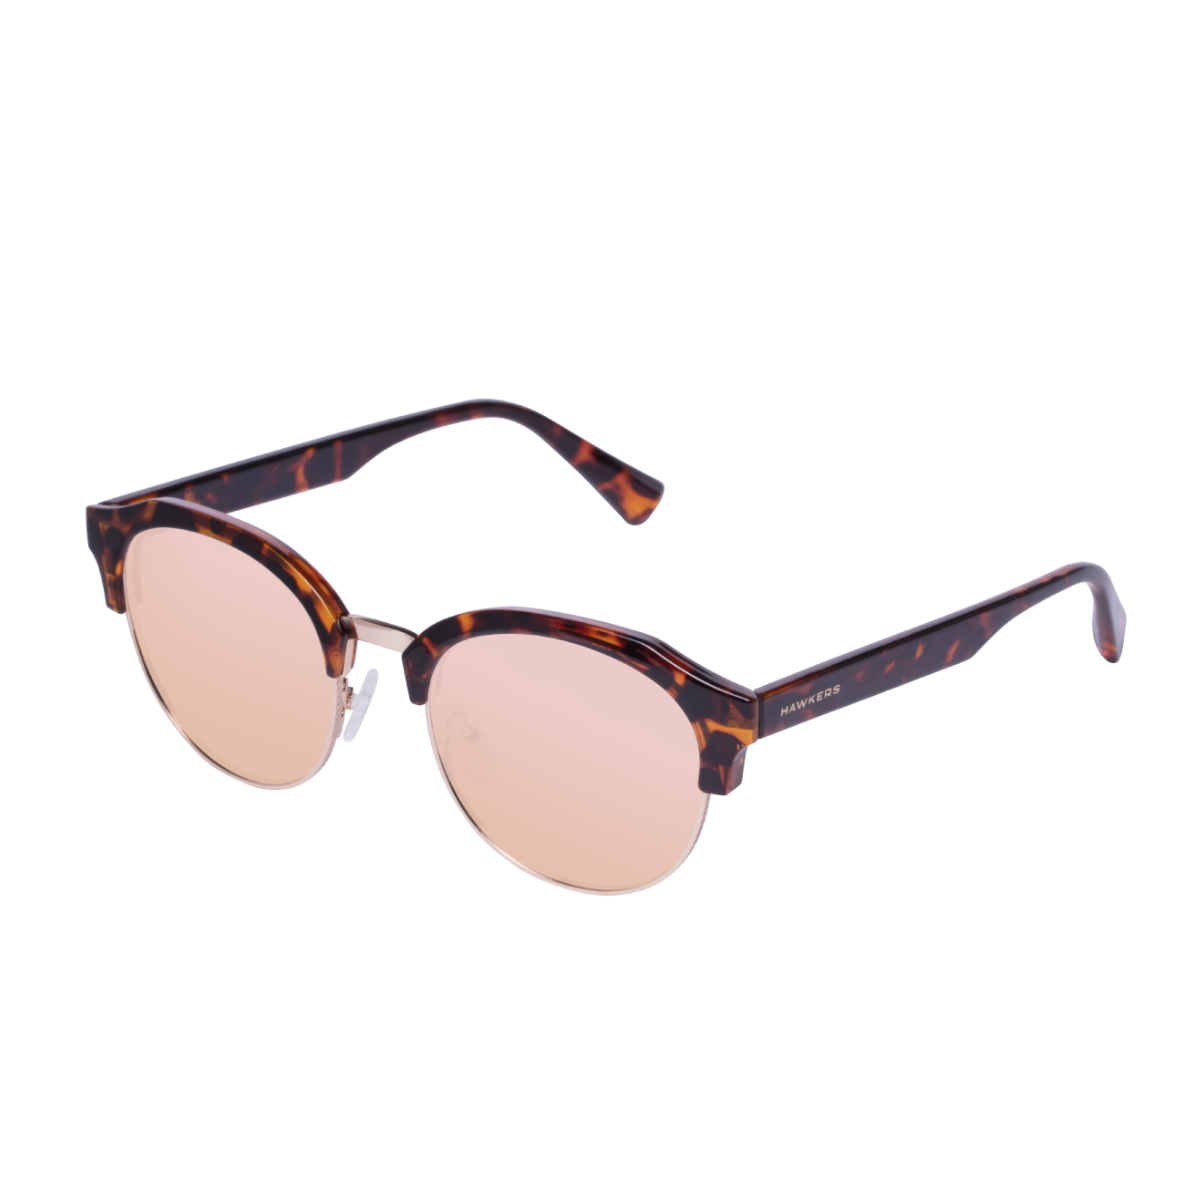 Carey - Rose Gold Classic Rounded